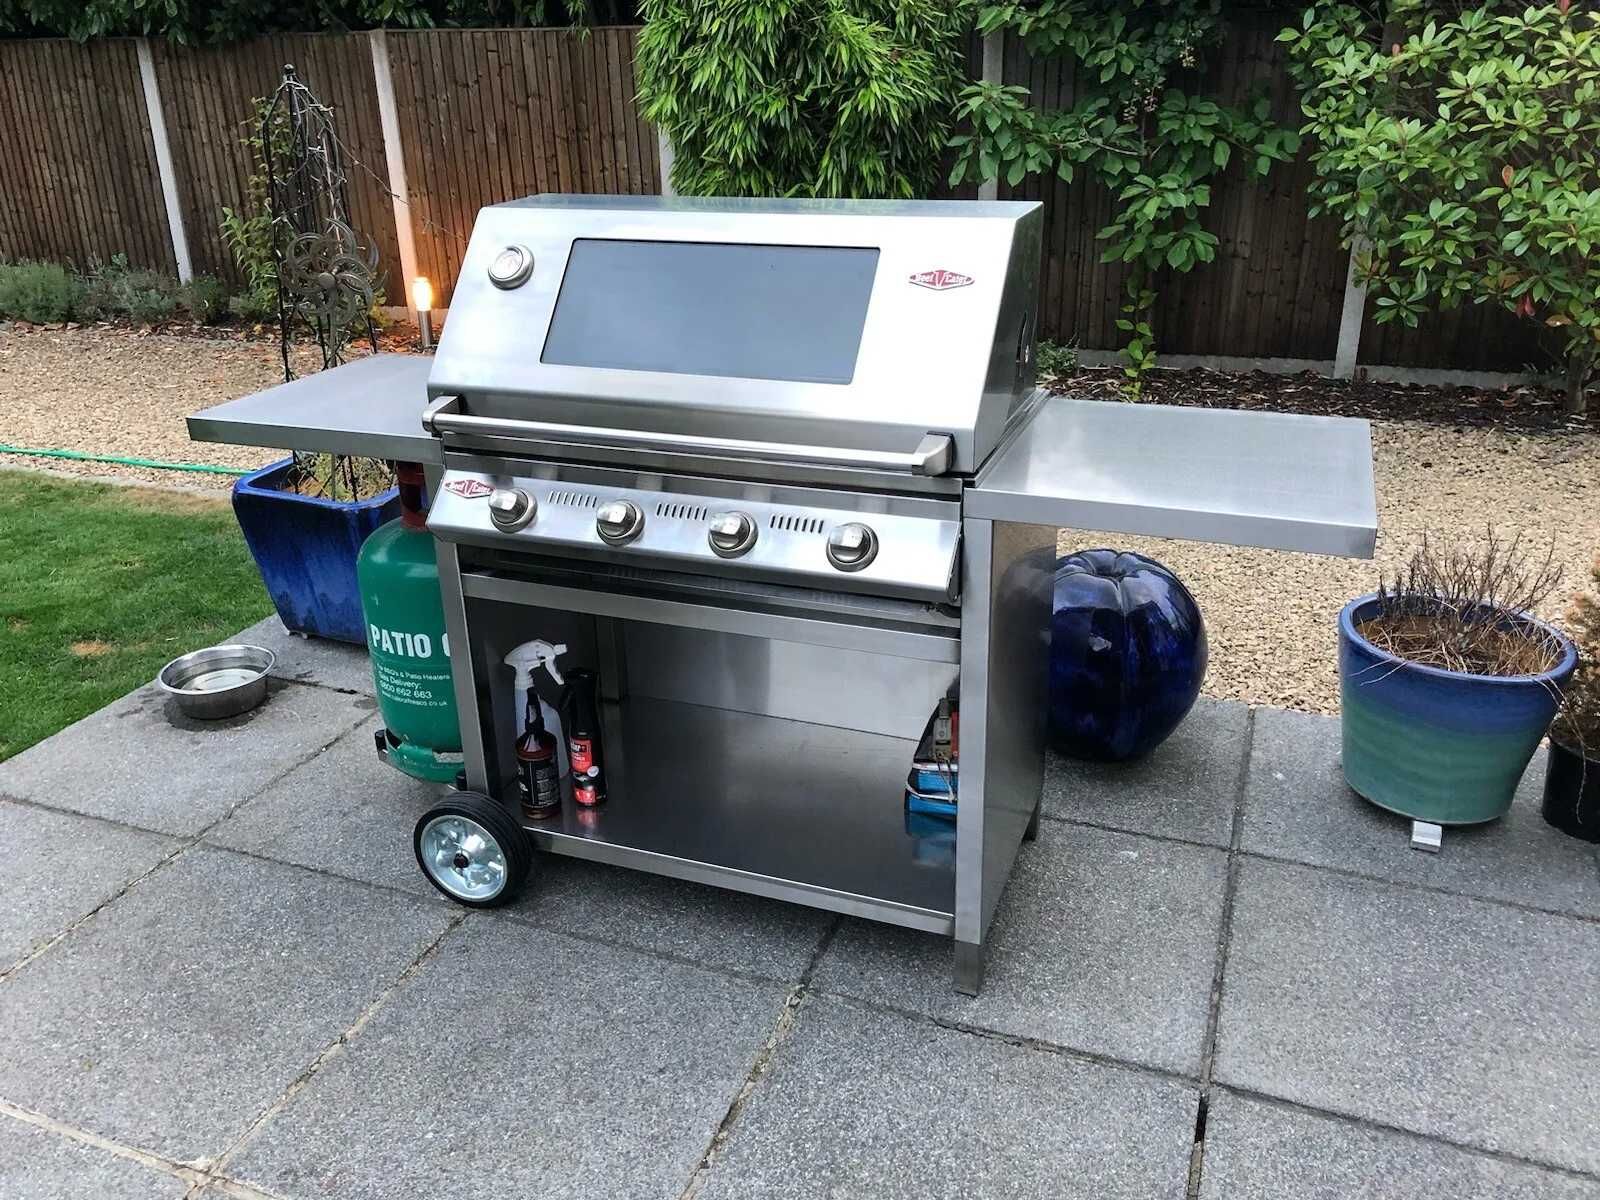 Grill Beefeater Signature S3000S